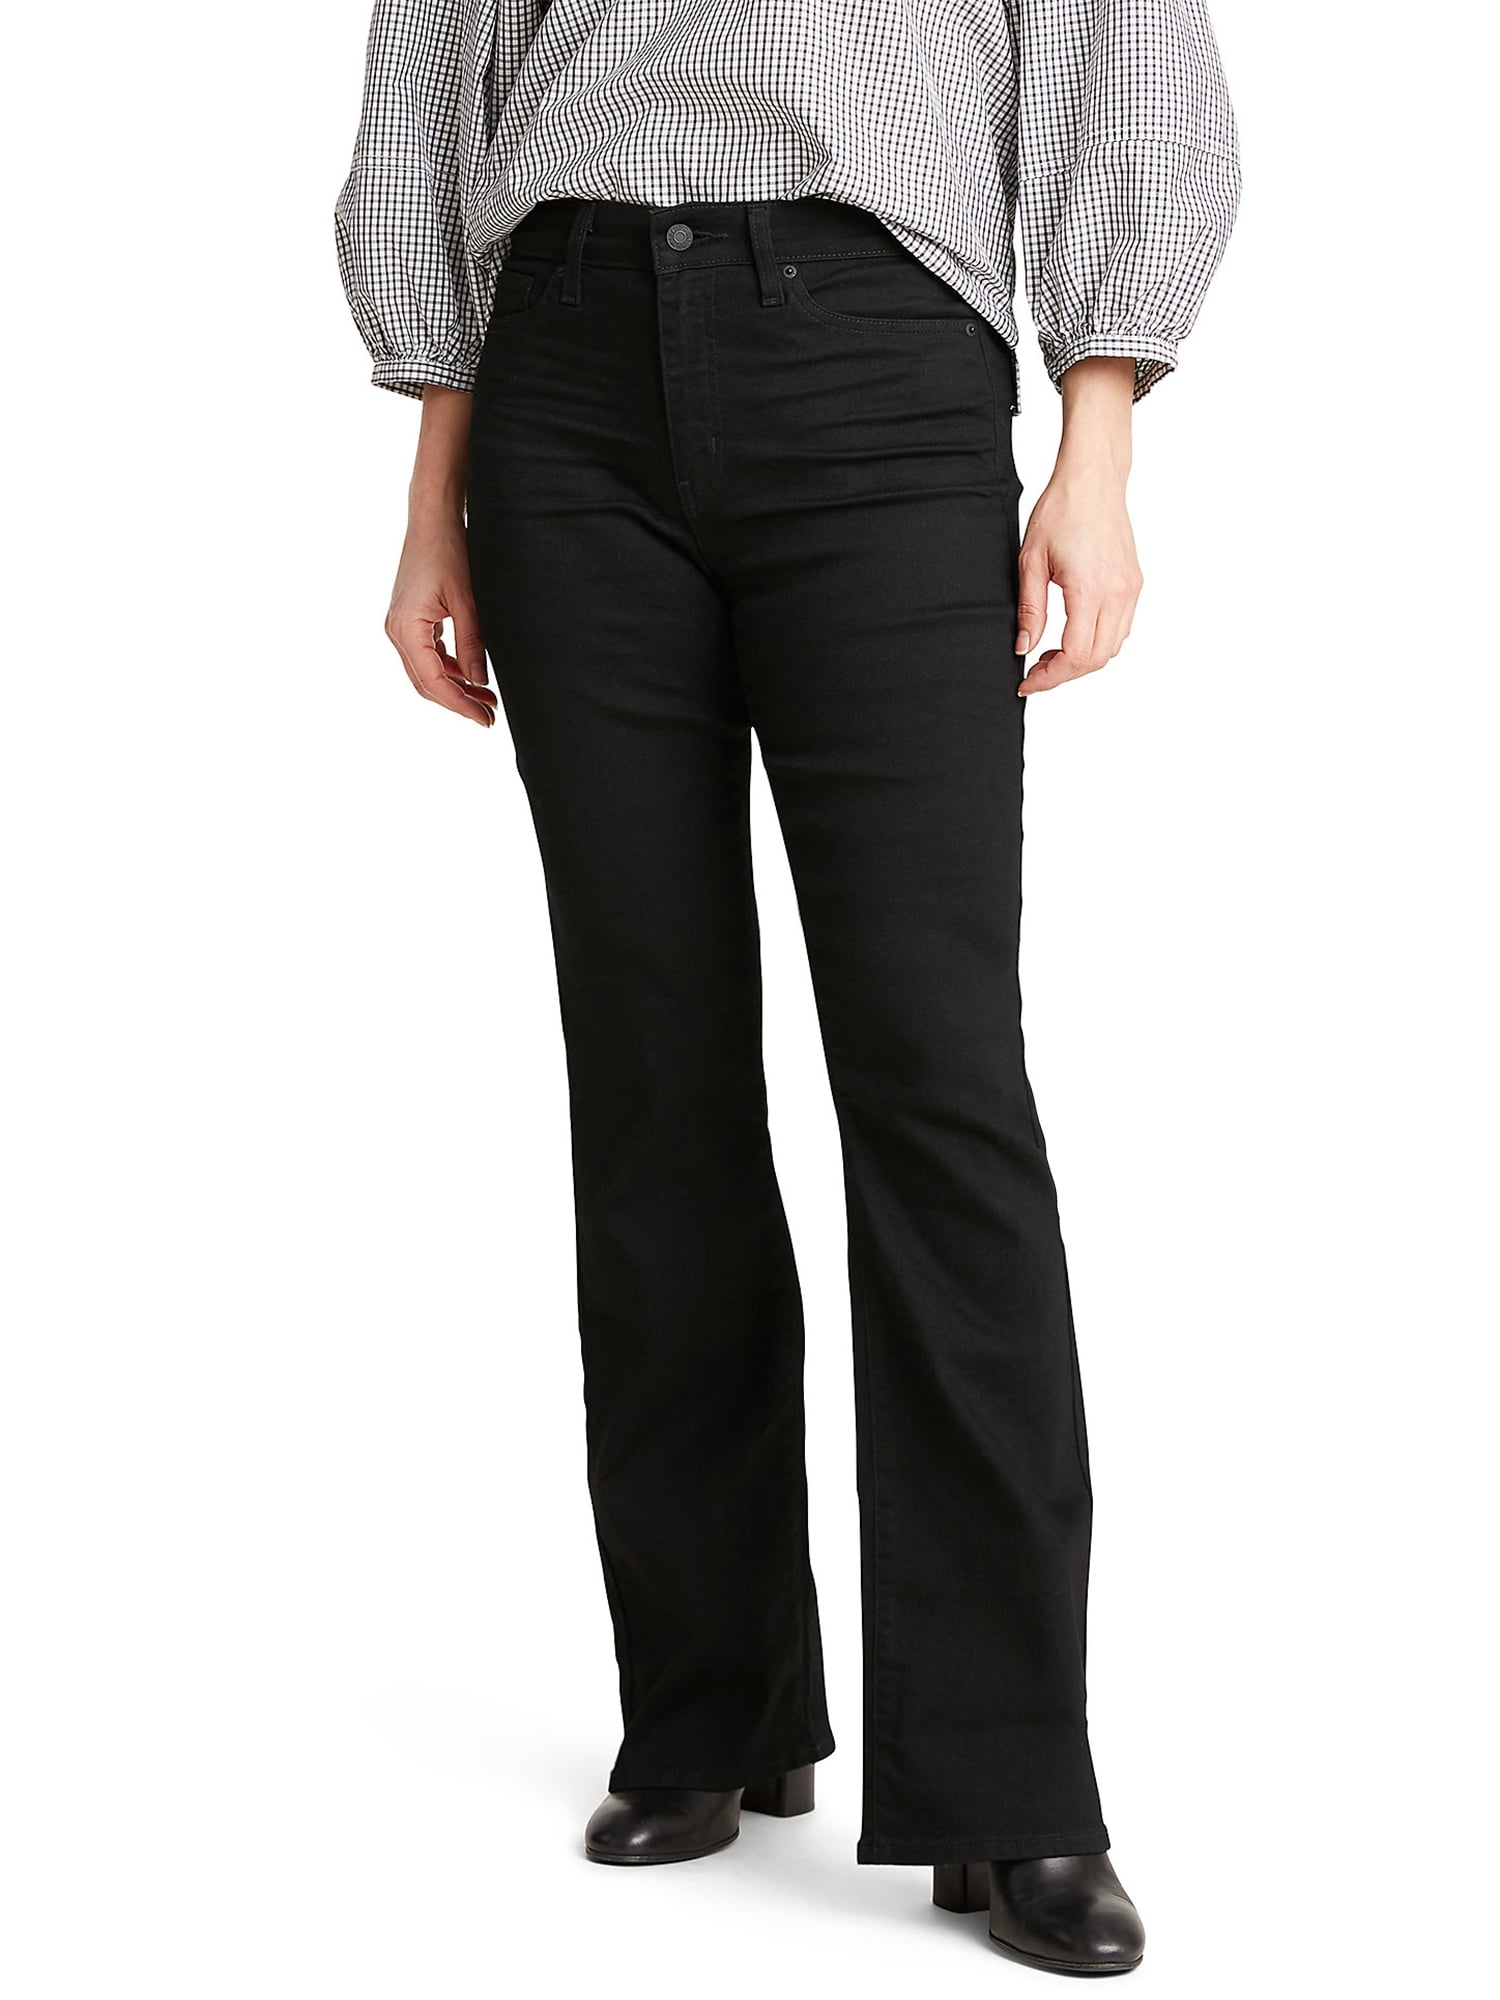 Buy > women's black high rise bootcut jeans > in stock